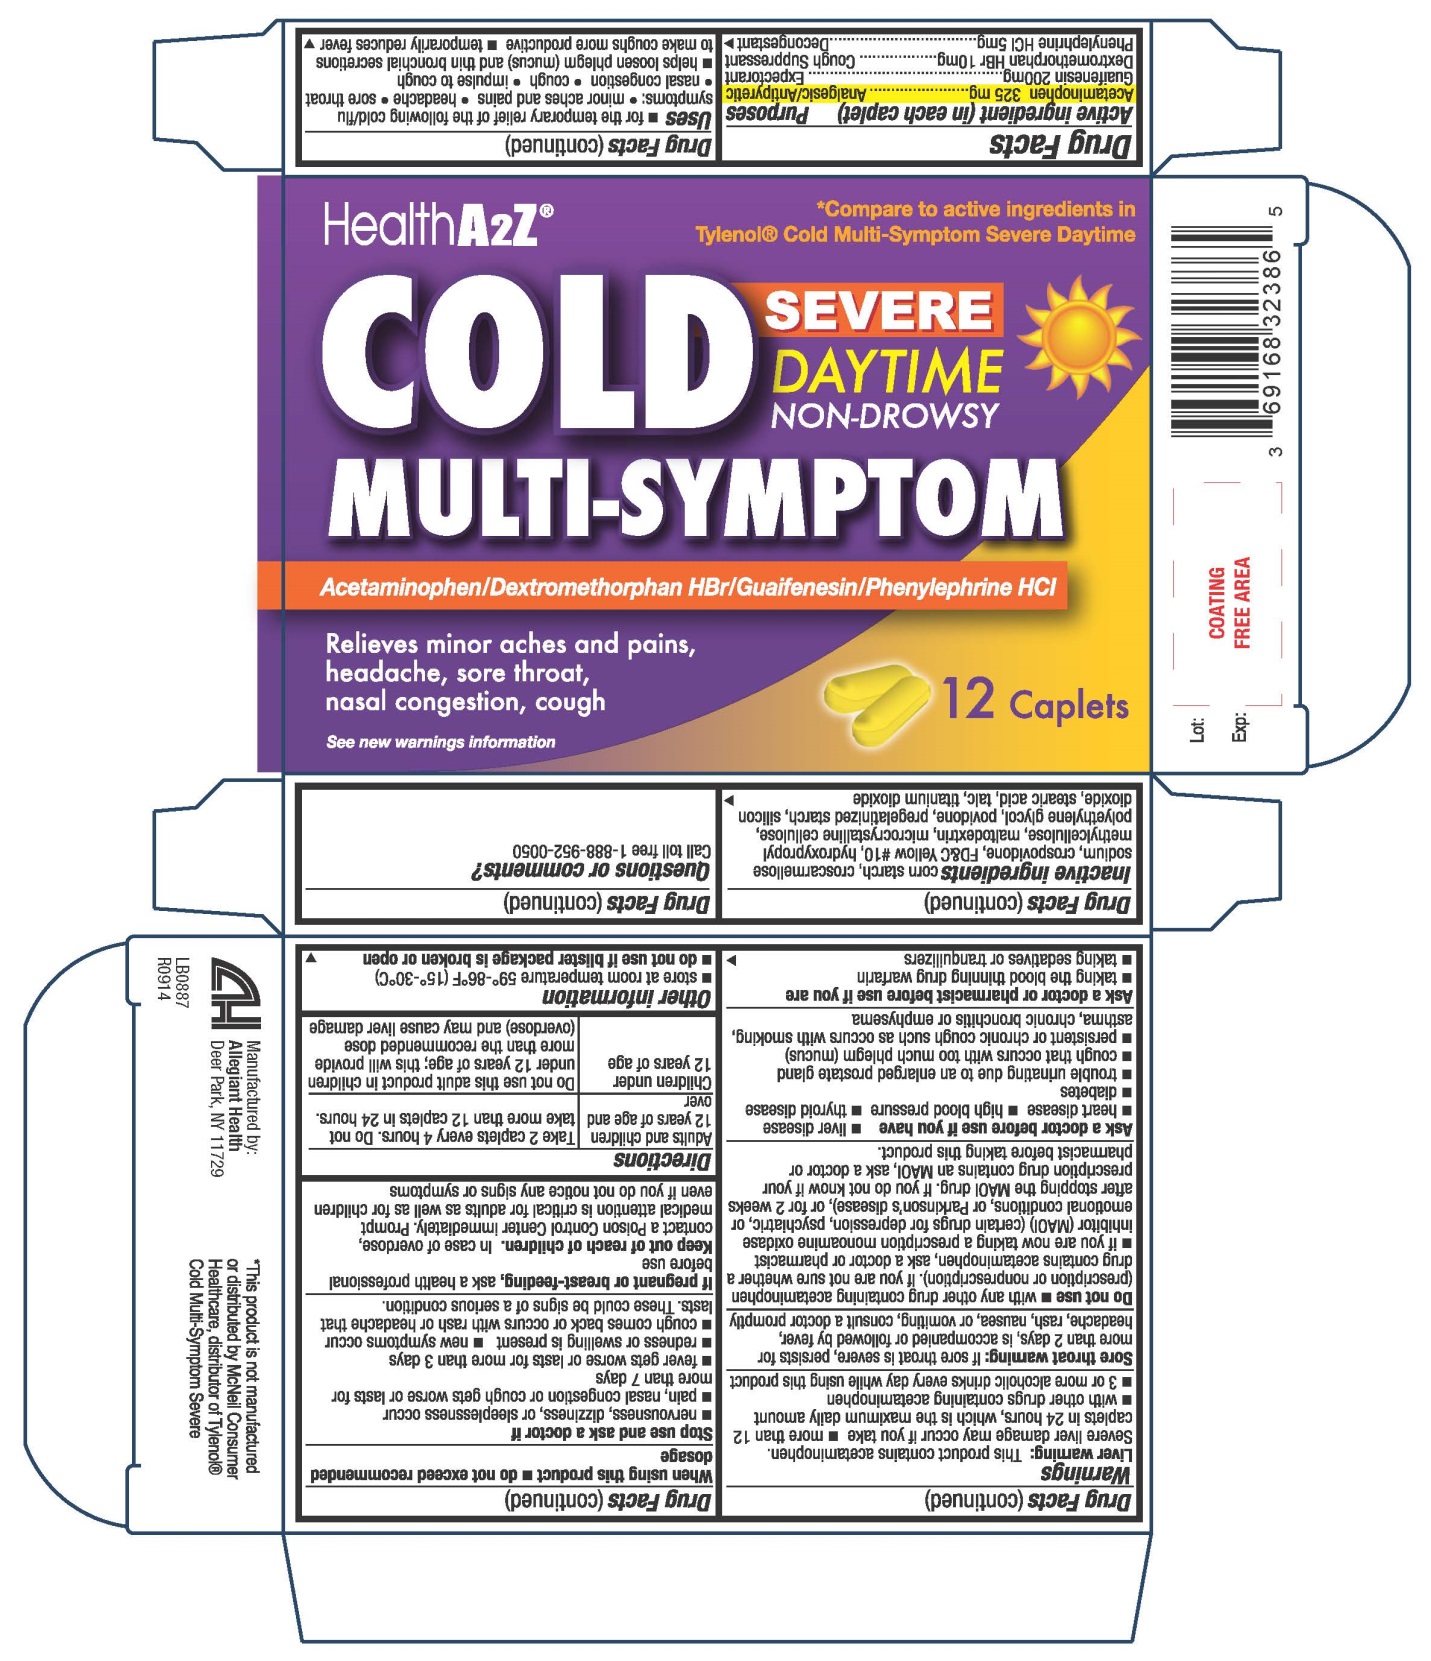 Cold Multi-symptom Day-time while Breastfeeding